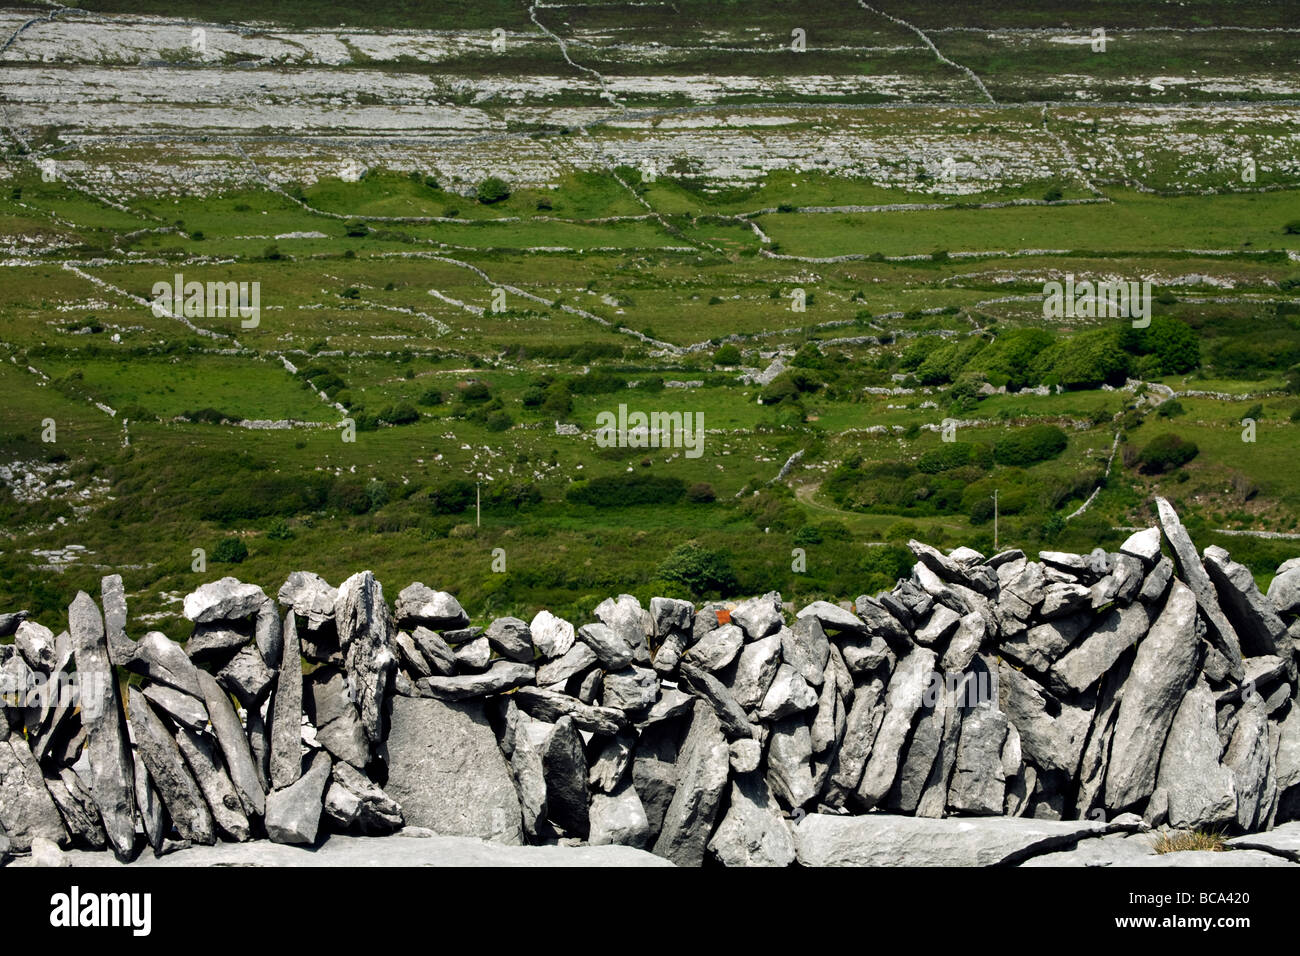 A view of a drystone wall and wall patterns in the Burren, Eire Stock Photo